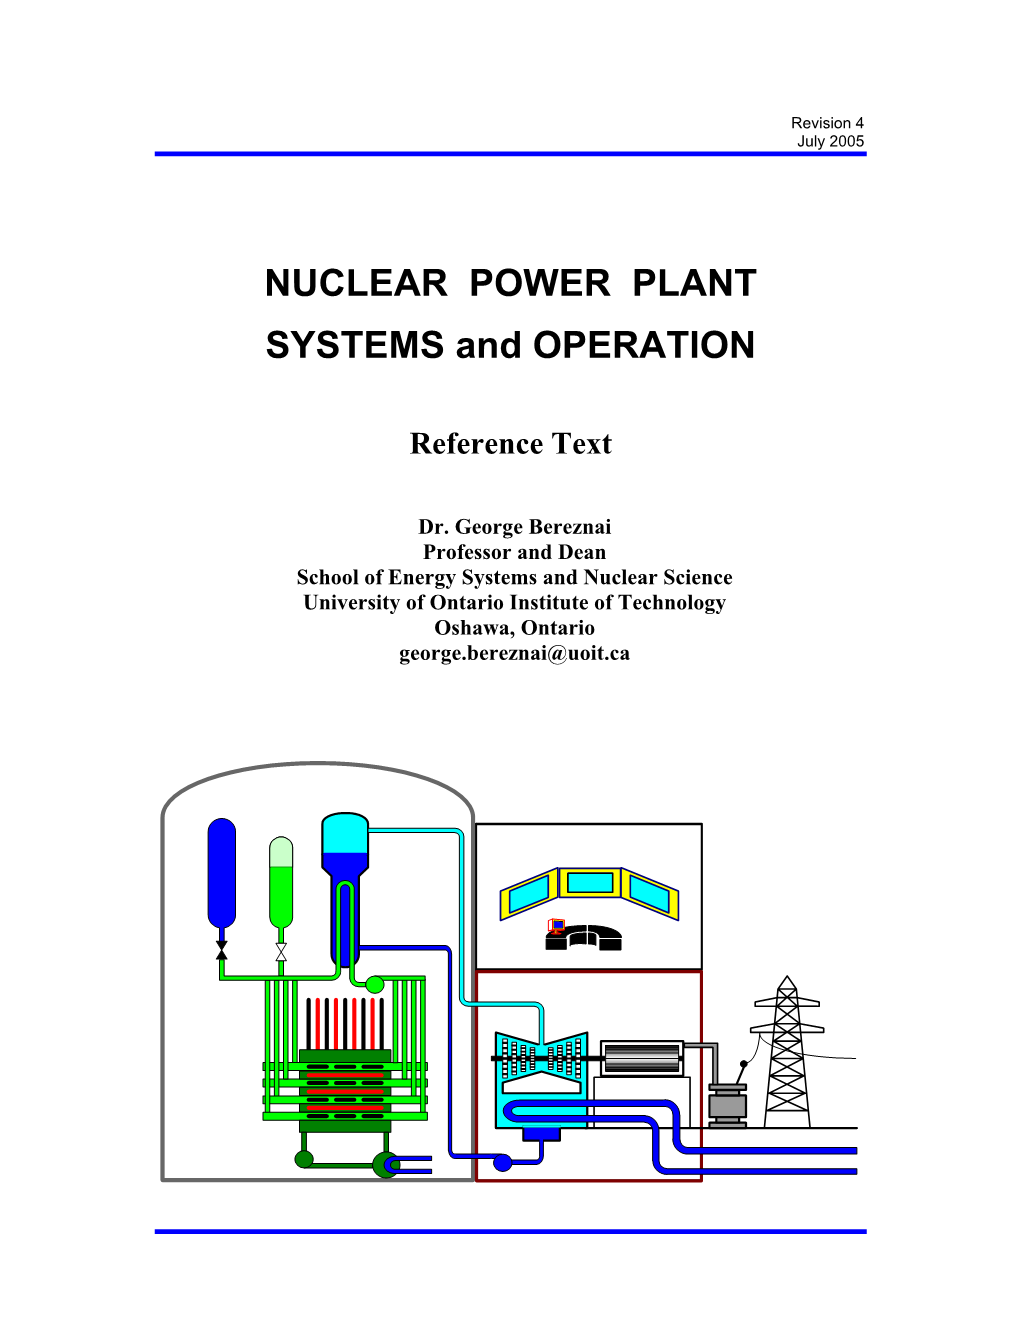 NUCLEAR POWER PLANT SYSTEMS and OPERATION